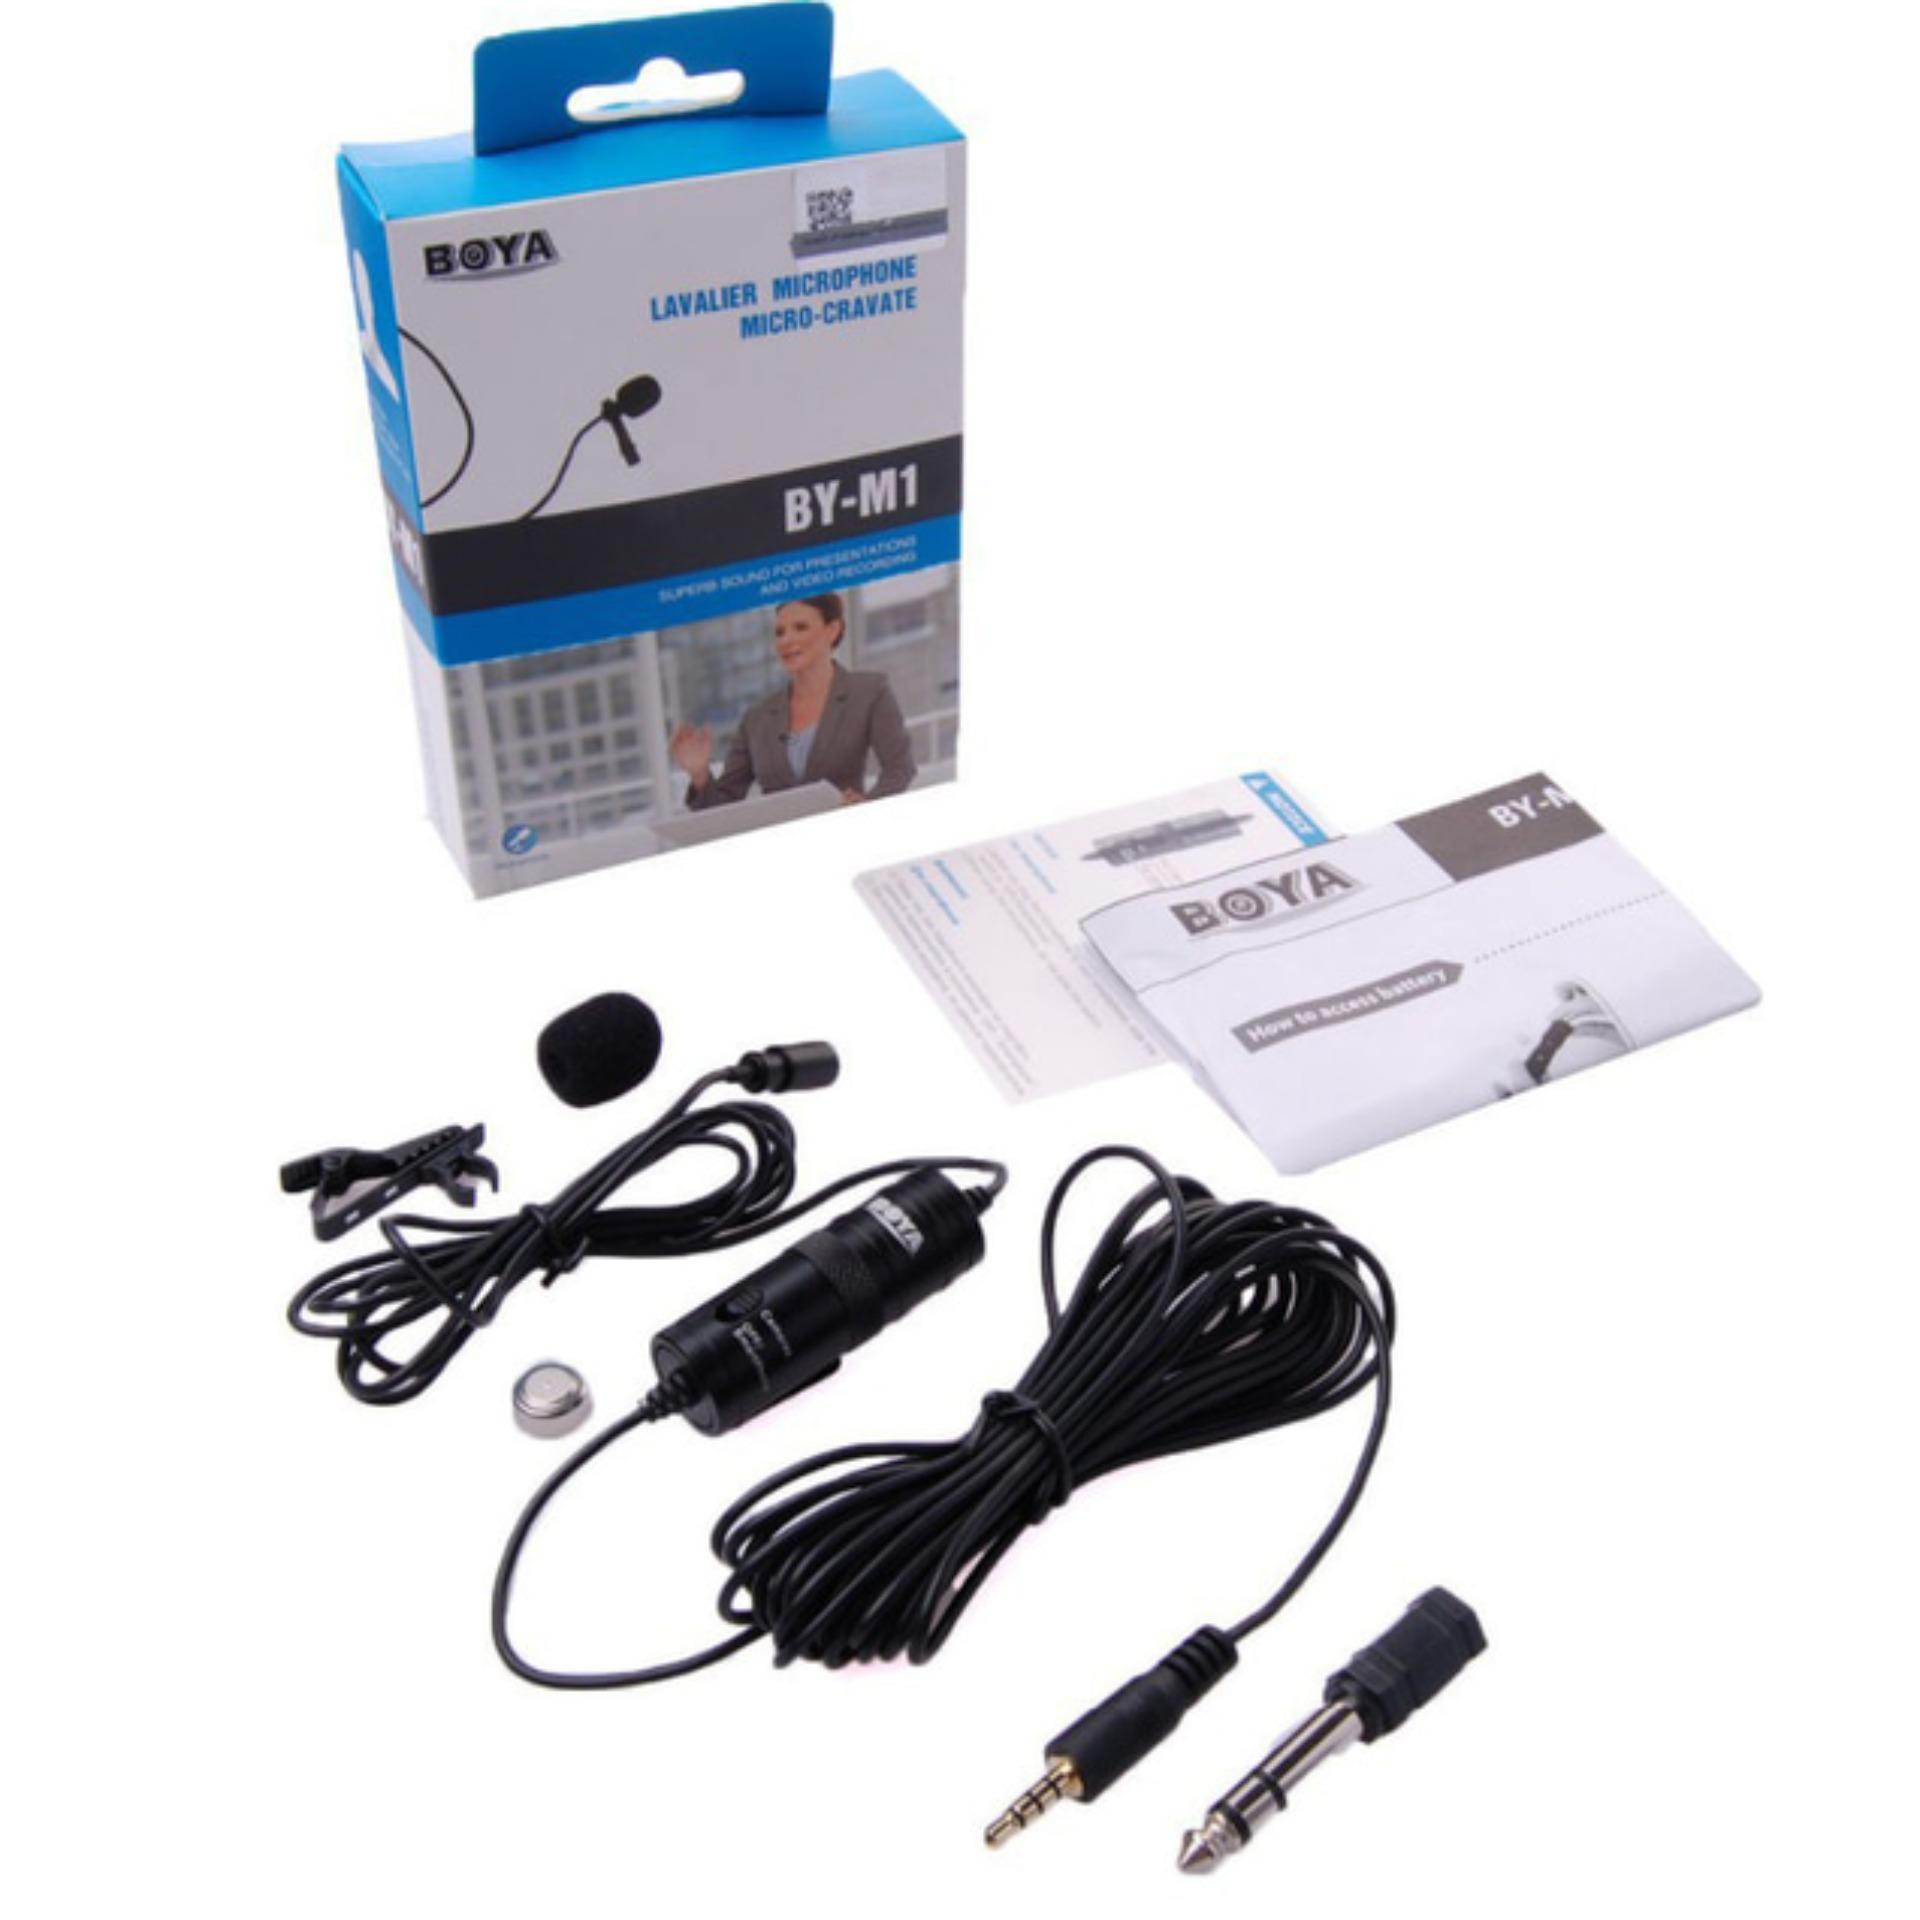 BOYA BY-M1 Clip-On Omnidirectional Lavalier Microphone 3.5mm Jack Microphone for iPhone iPad iPod Android DLL